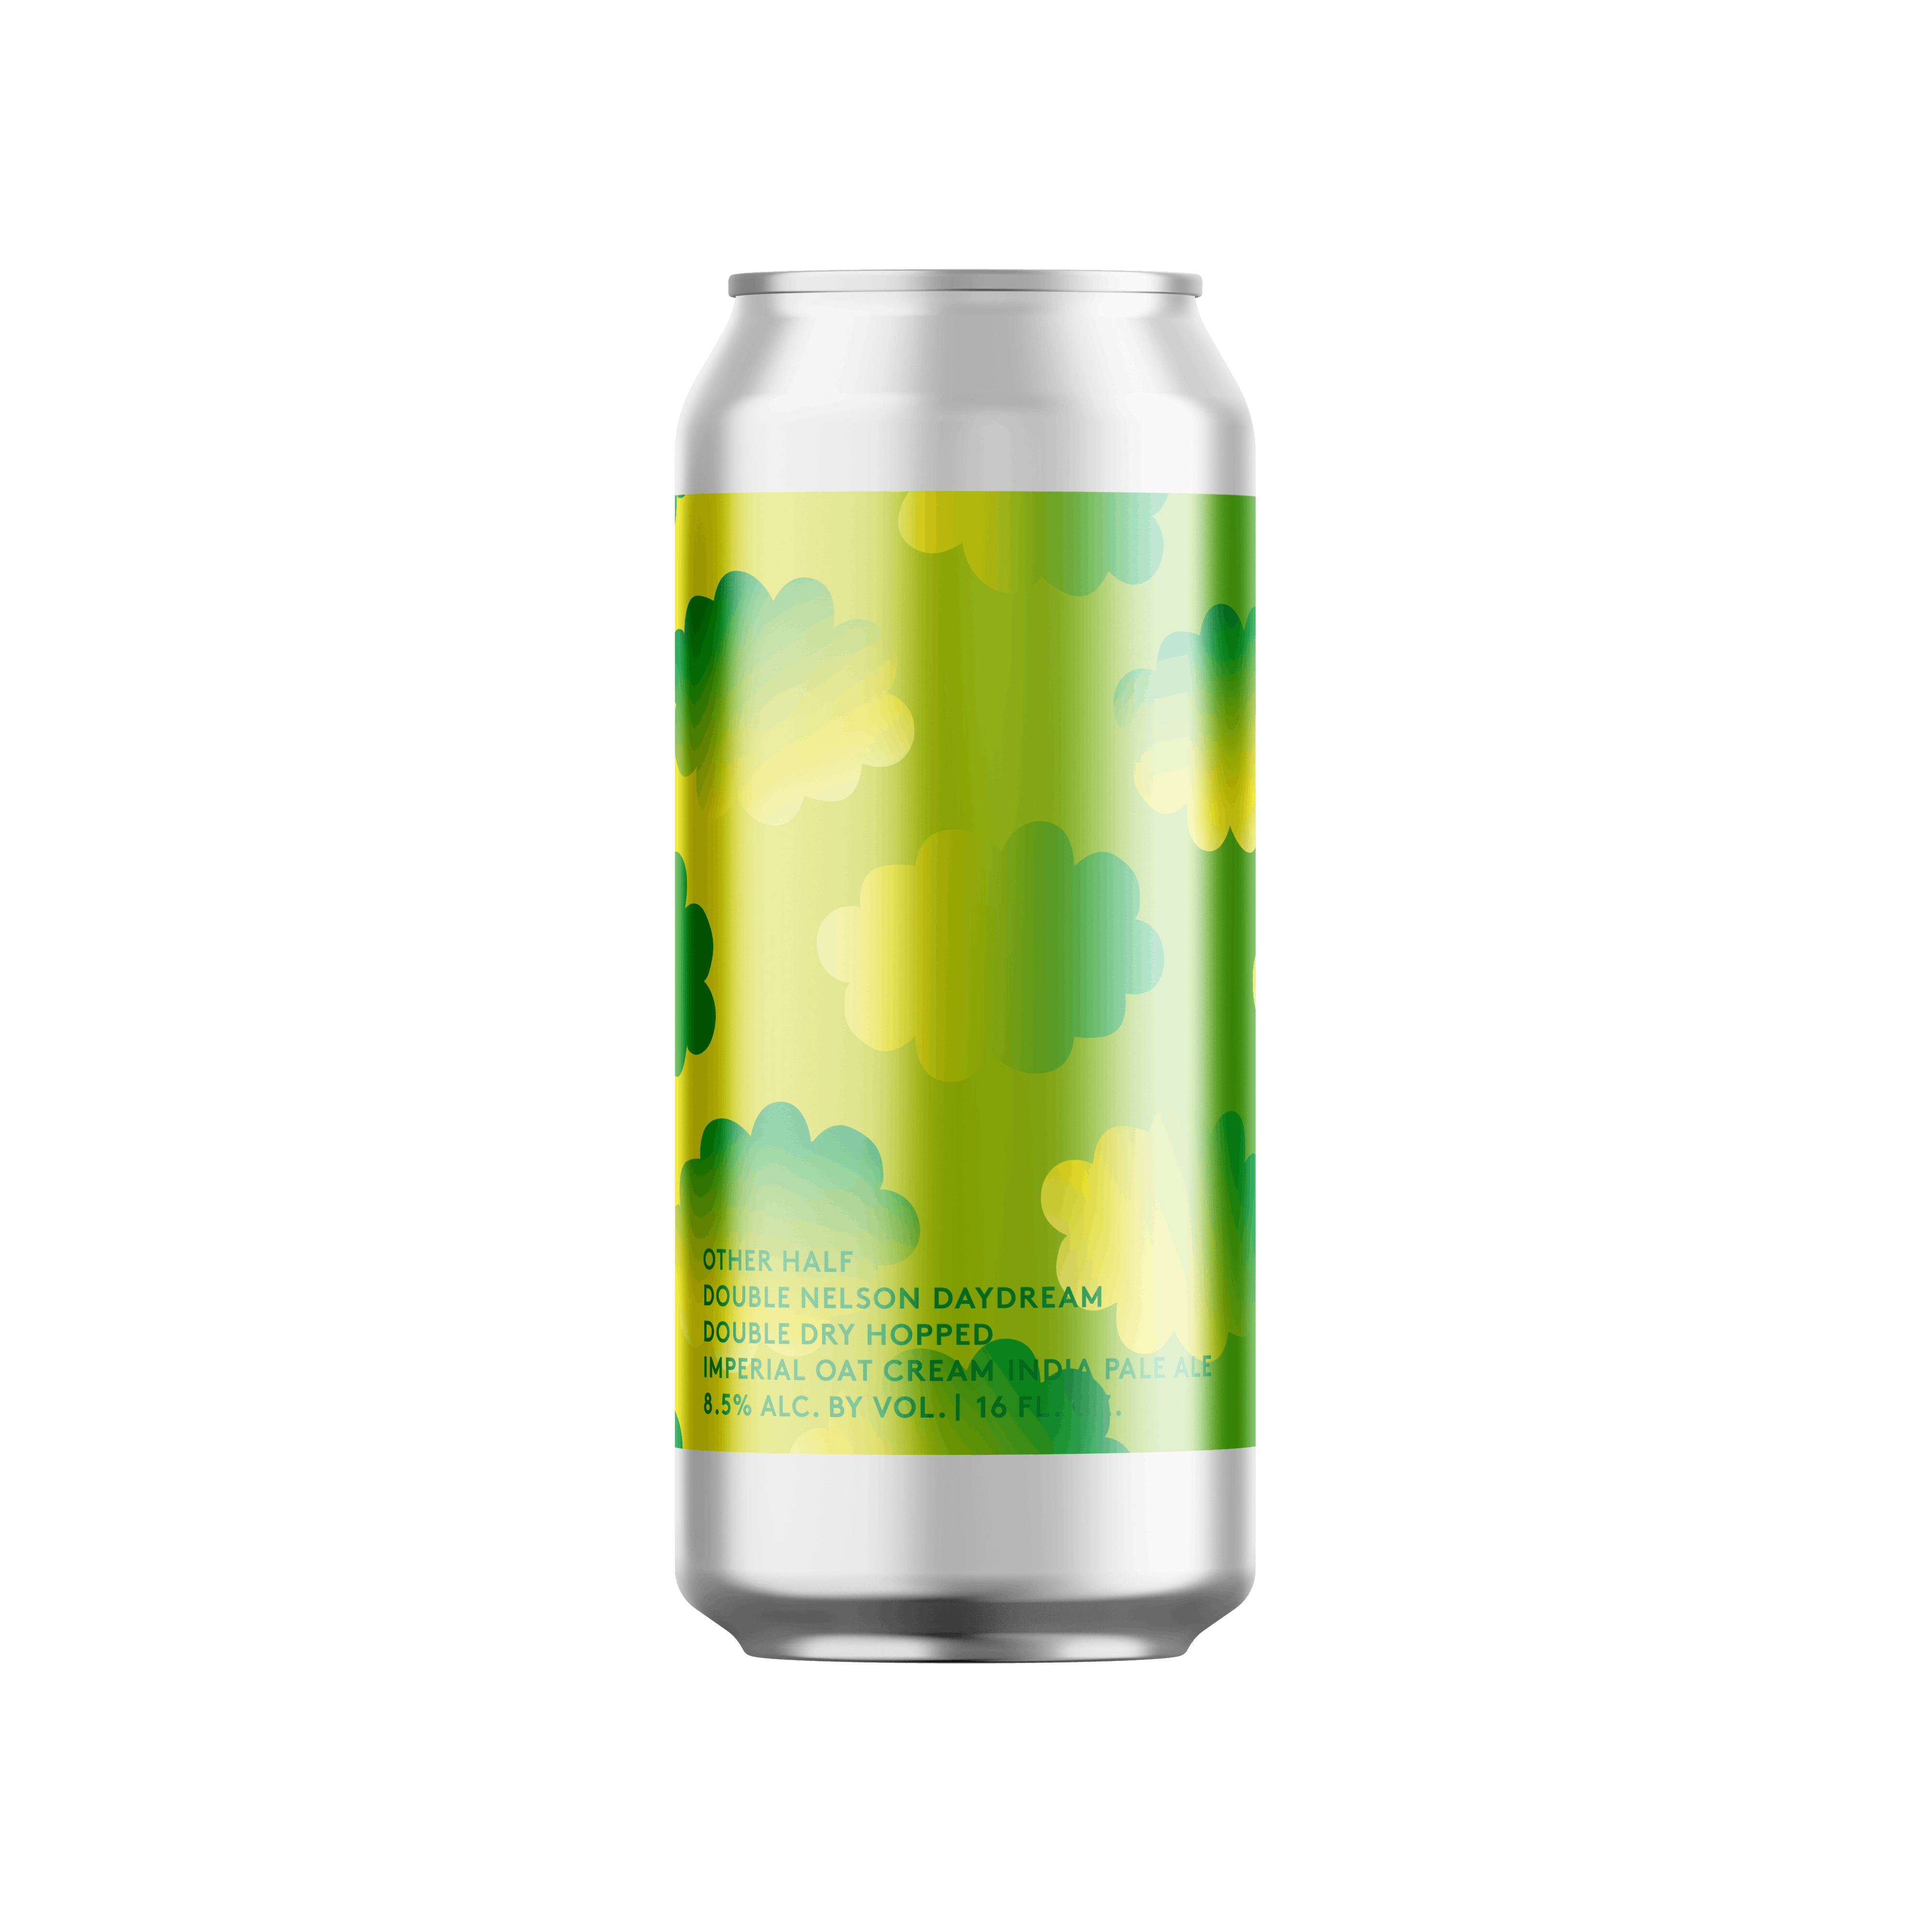 What is double dry hopping (DDH)?